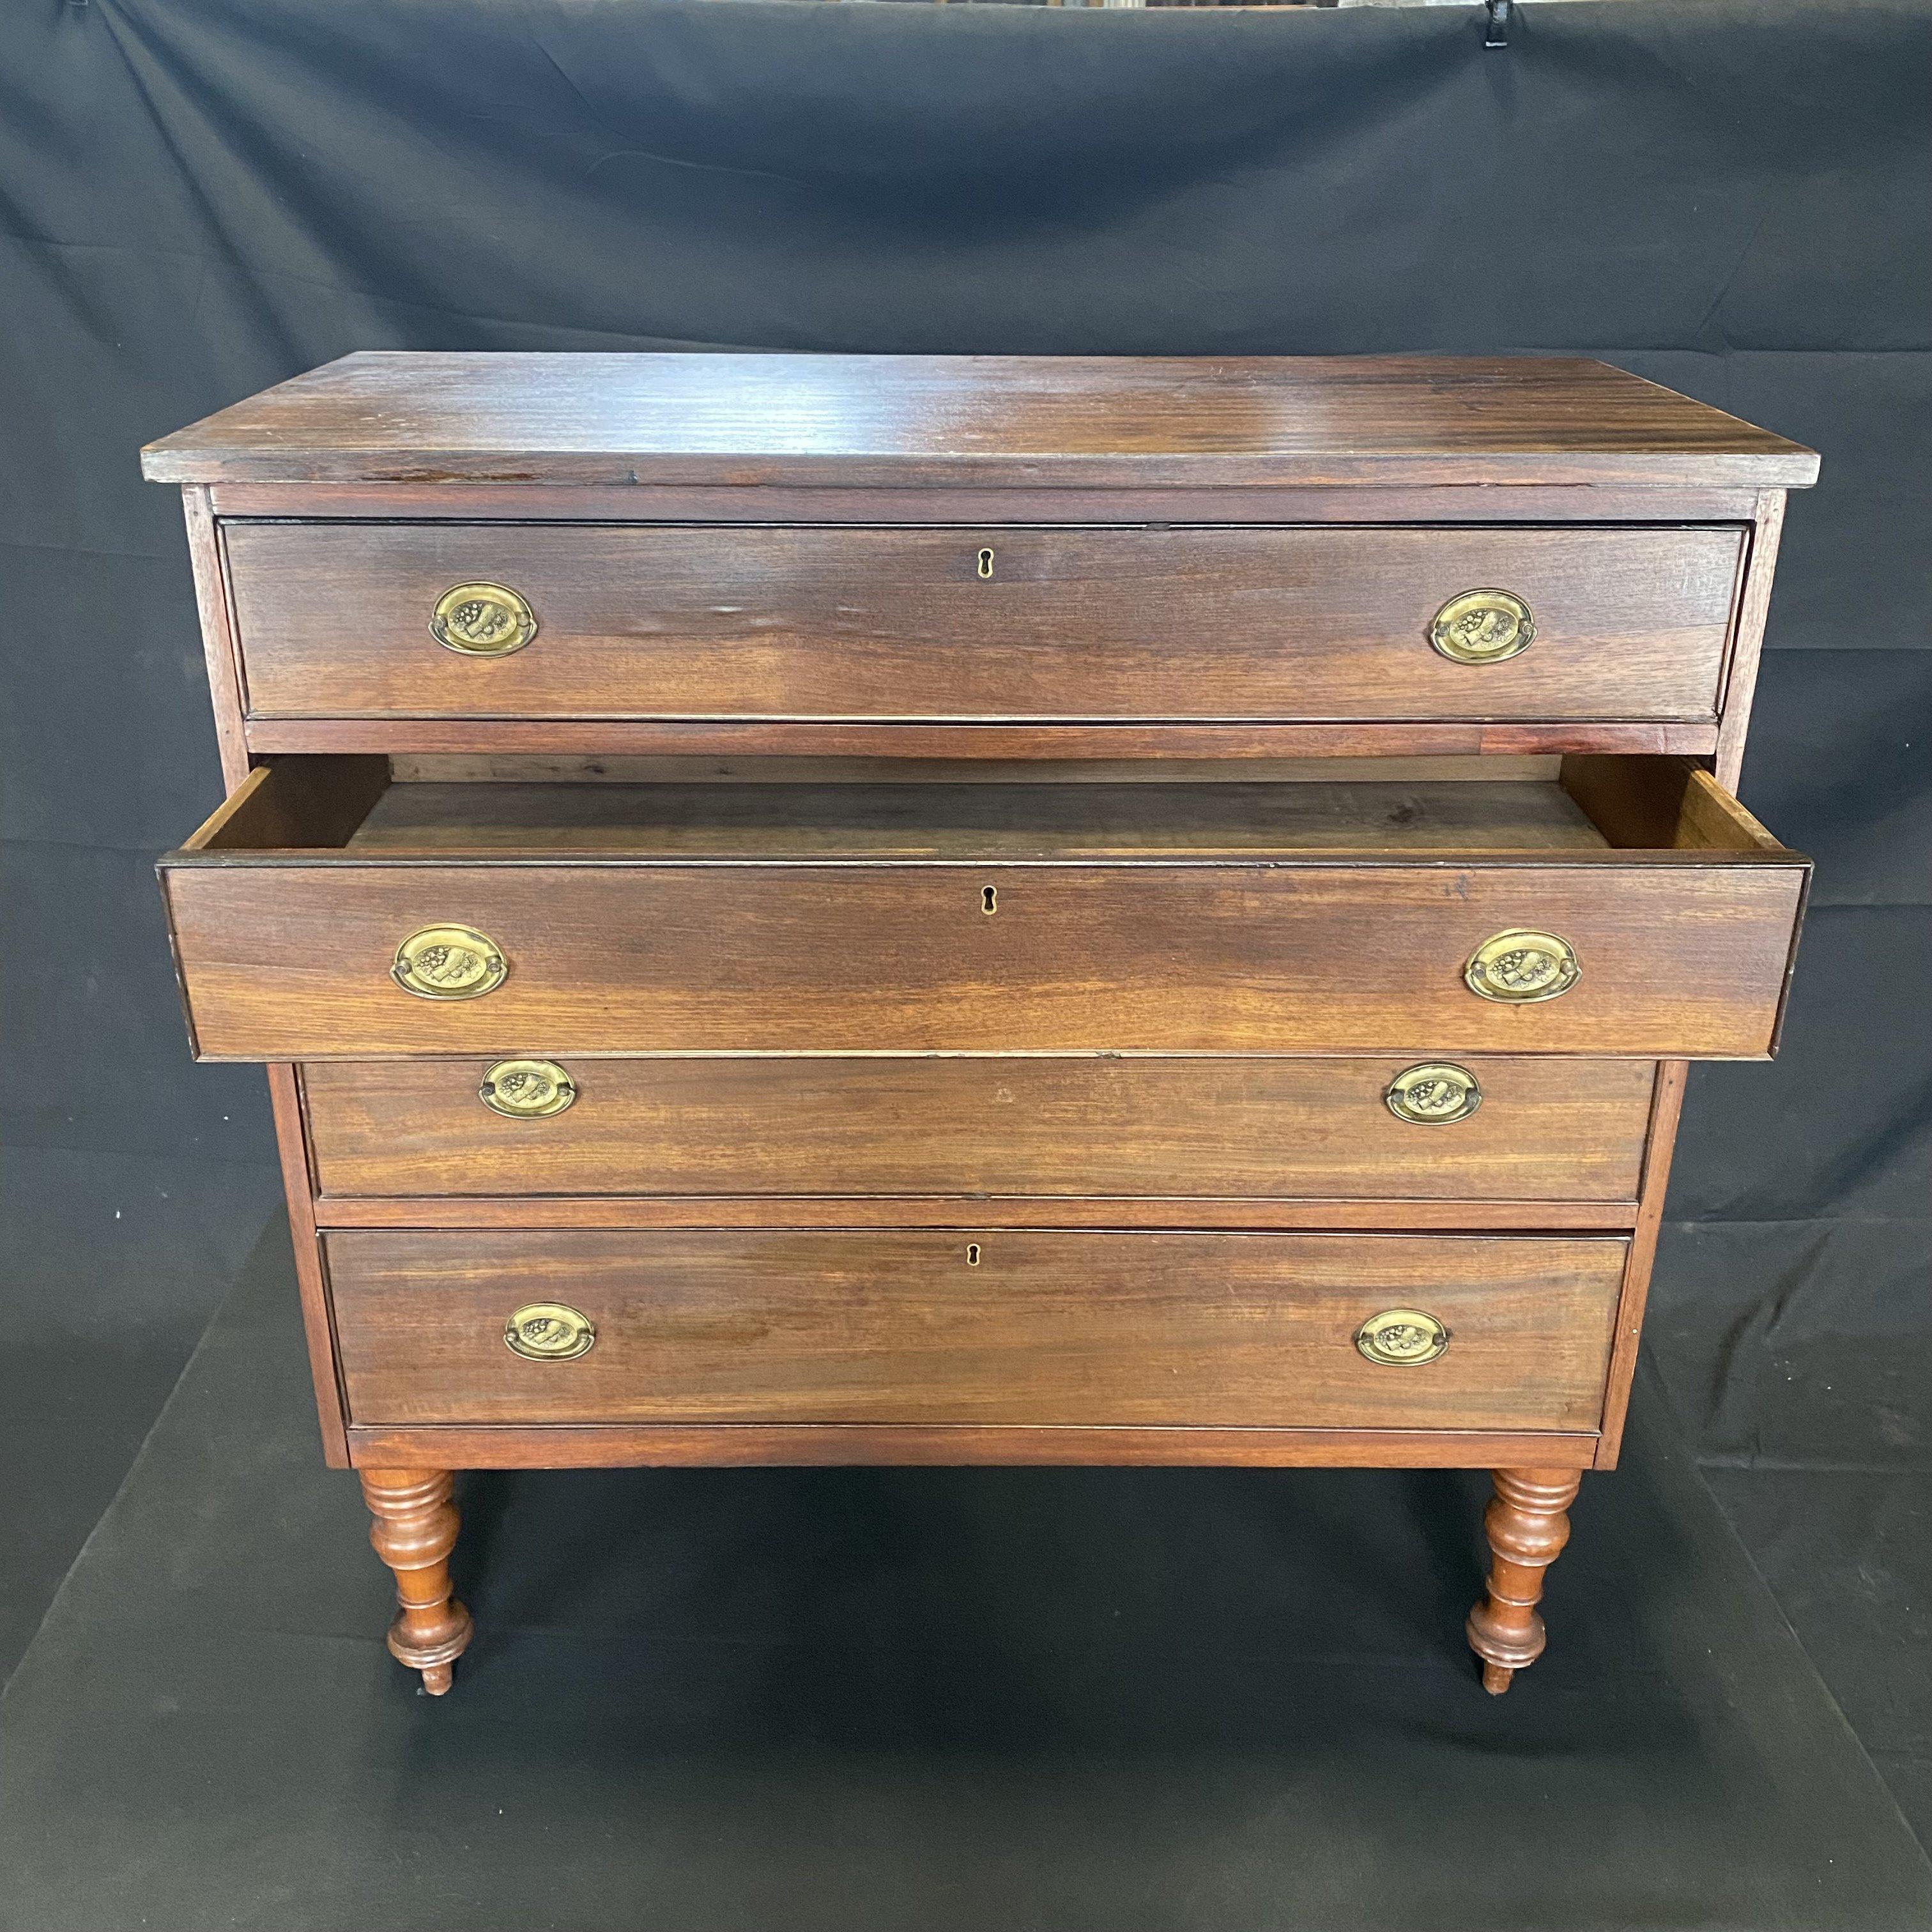 American Sheraton mahogany chest with four cock beaded drawers with original wheat sheaf, fruit and oval floral brasses and bail handles under the single board mahogany top. Classic simplicity of this early Colonial American dresser is complemented